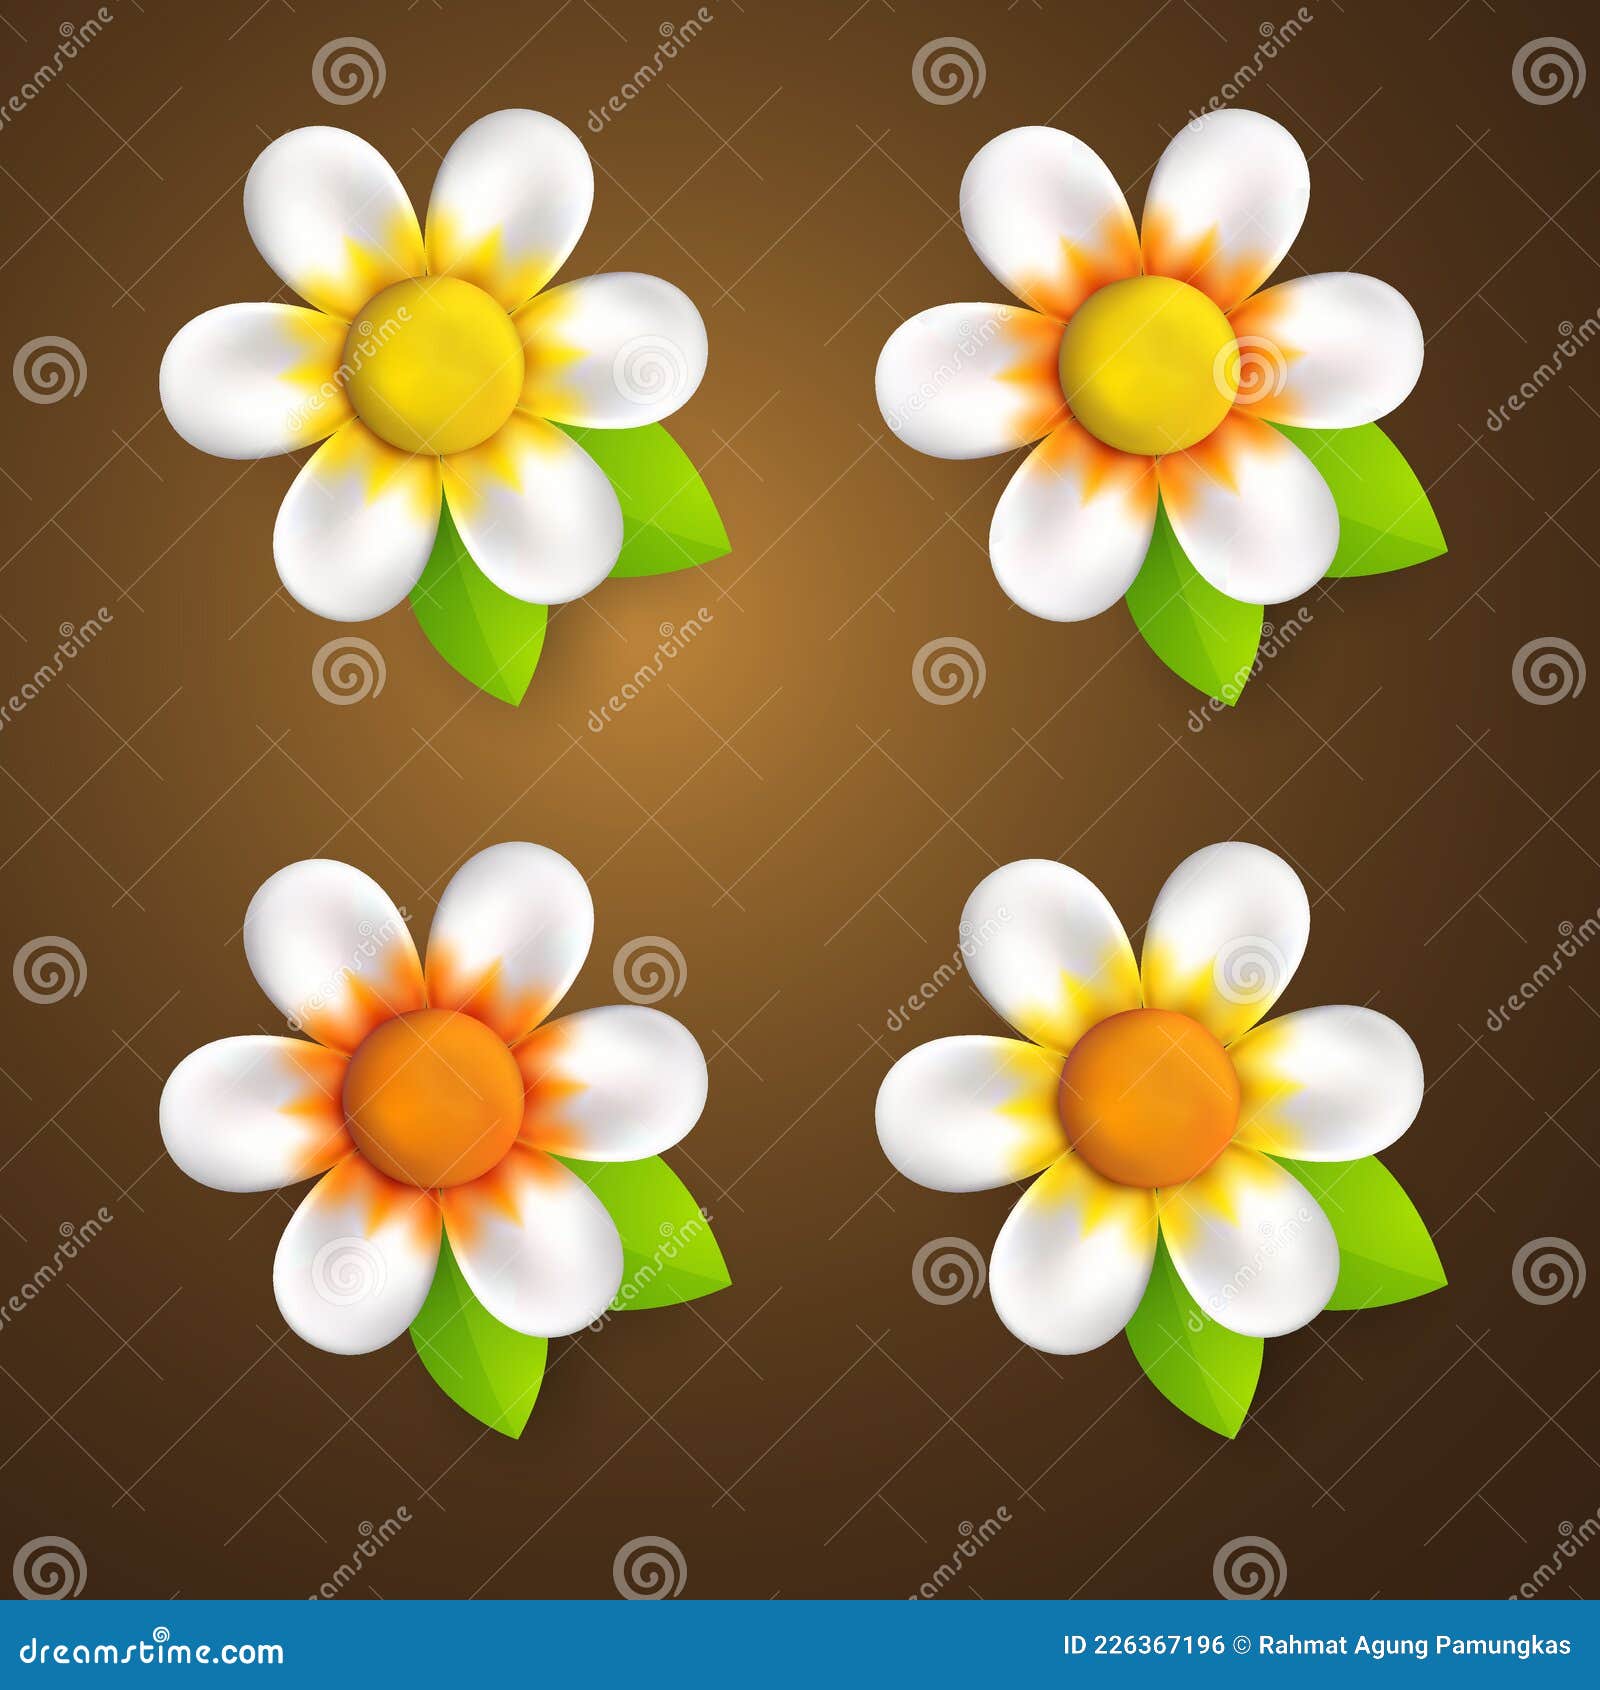 Realistic 3d Flower Cartoon Style Collection Set for Summer and Spring  Design Element Stock Vector - Illustration of design, flower: 226367196